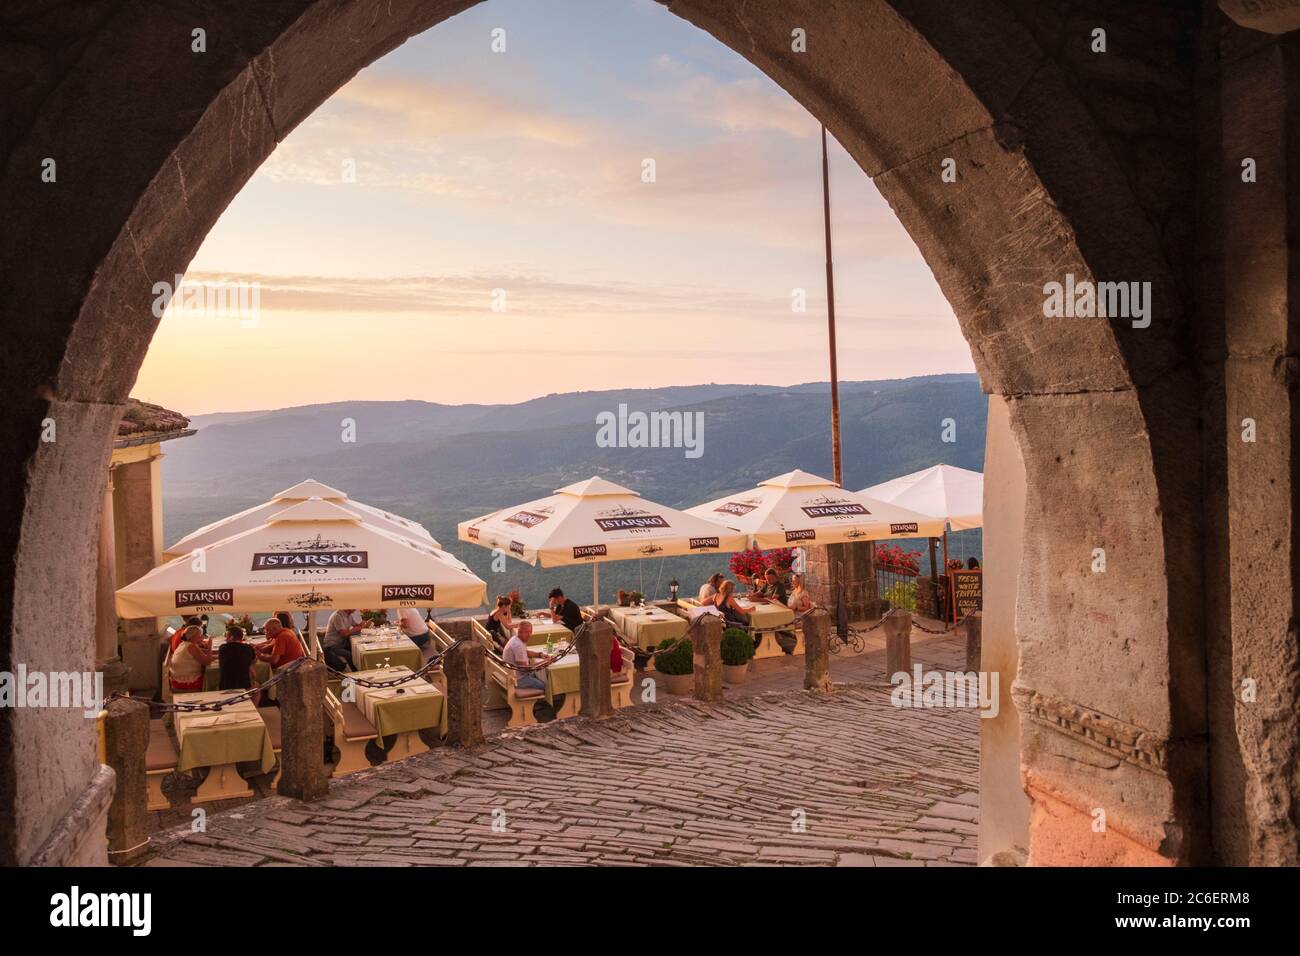 Outdoor Dining at Restaurant with view of mountains at sunset, Motovun, Istria, Croatia Stock Photo